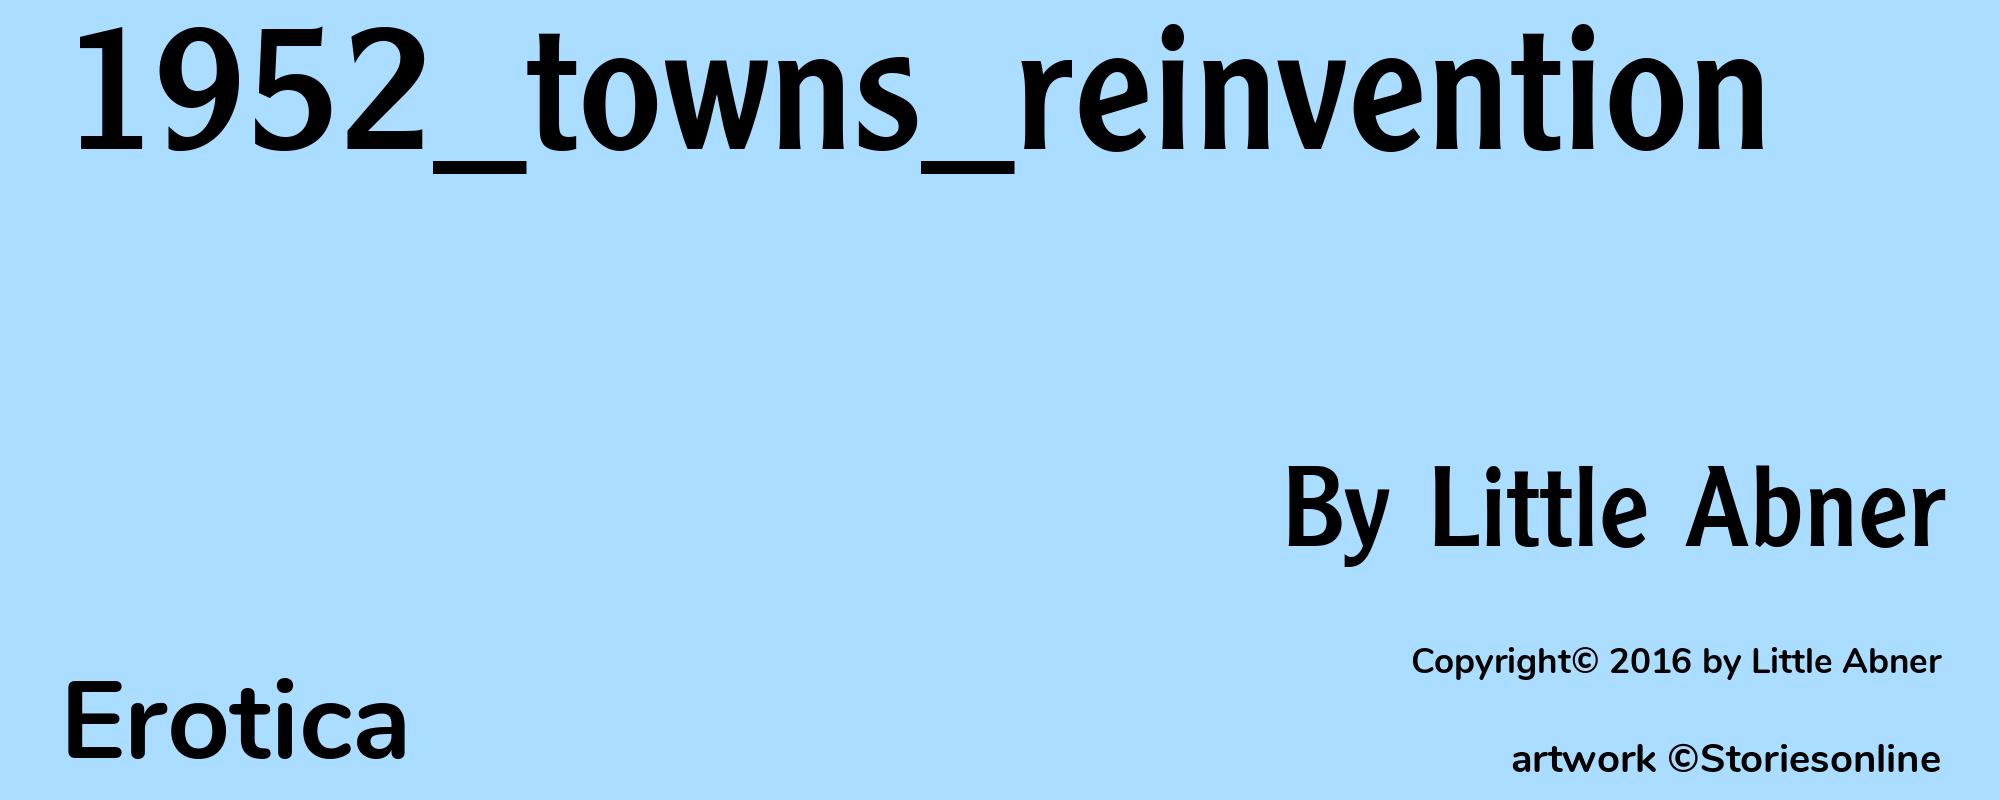 1952_towns_reinvention - Cover